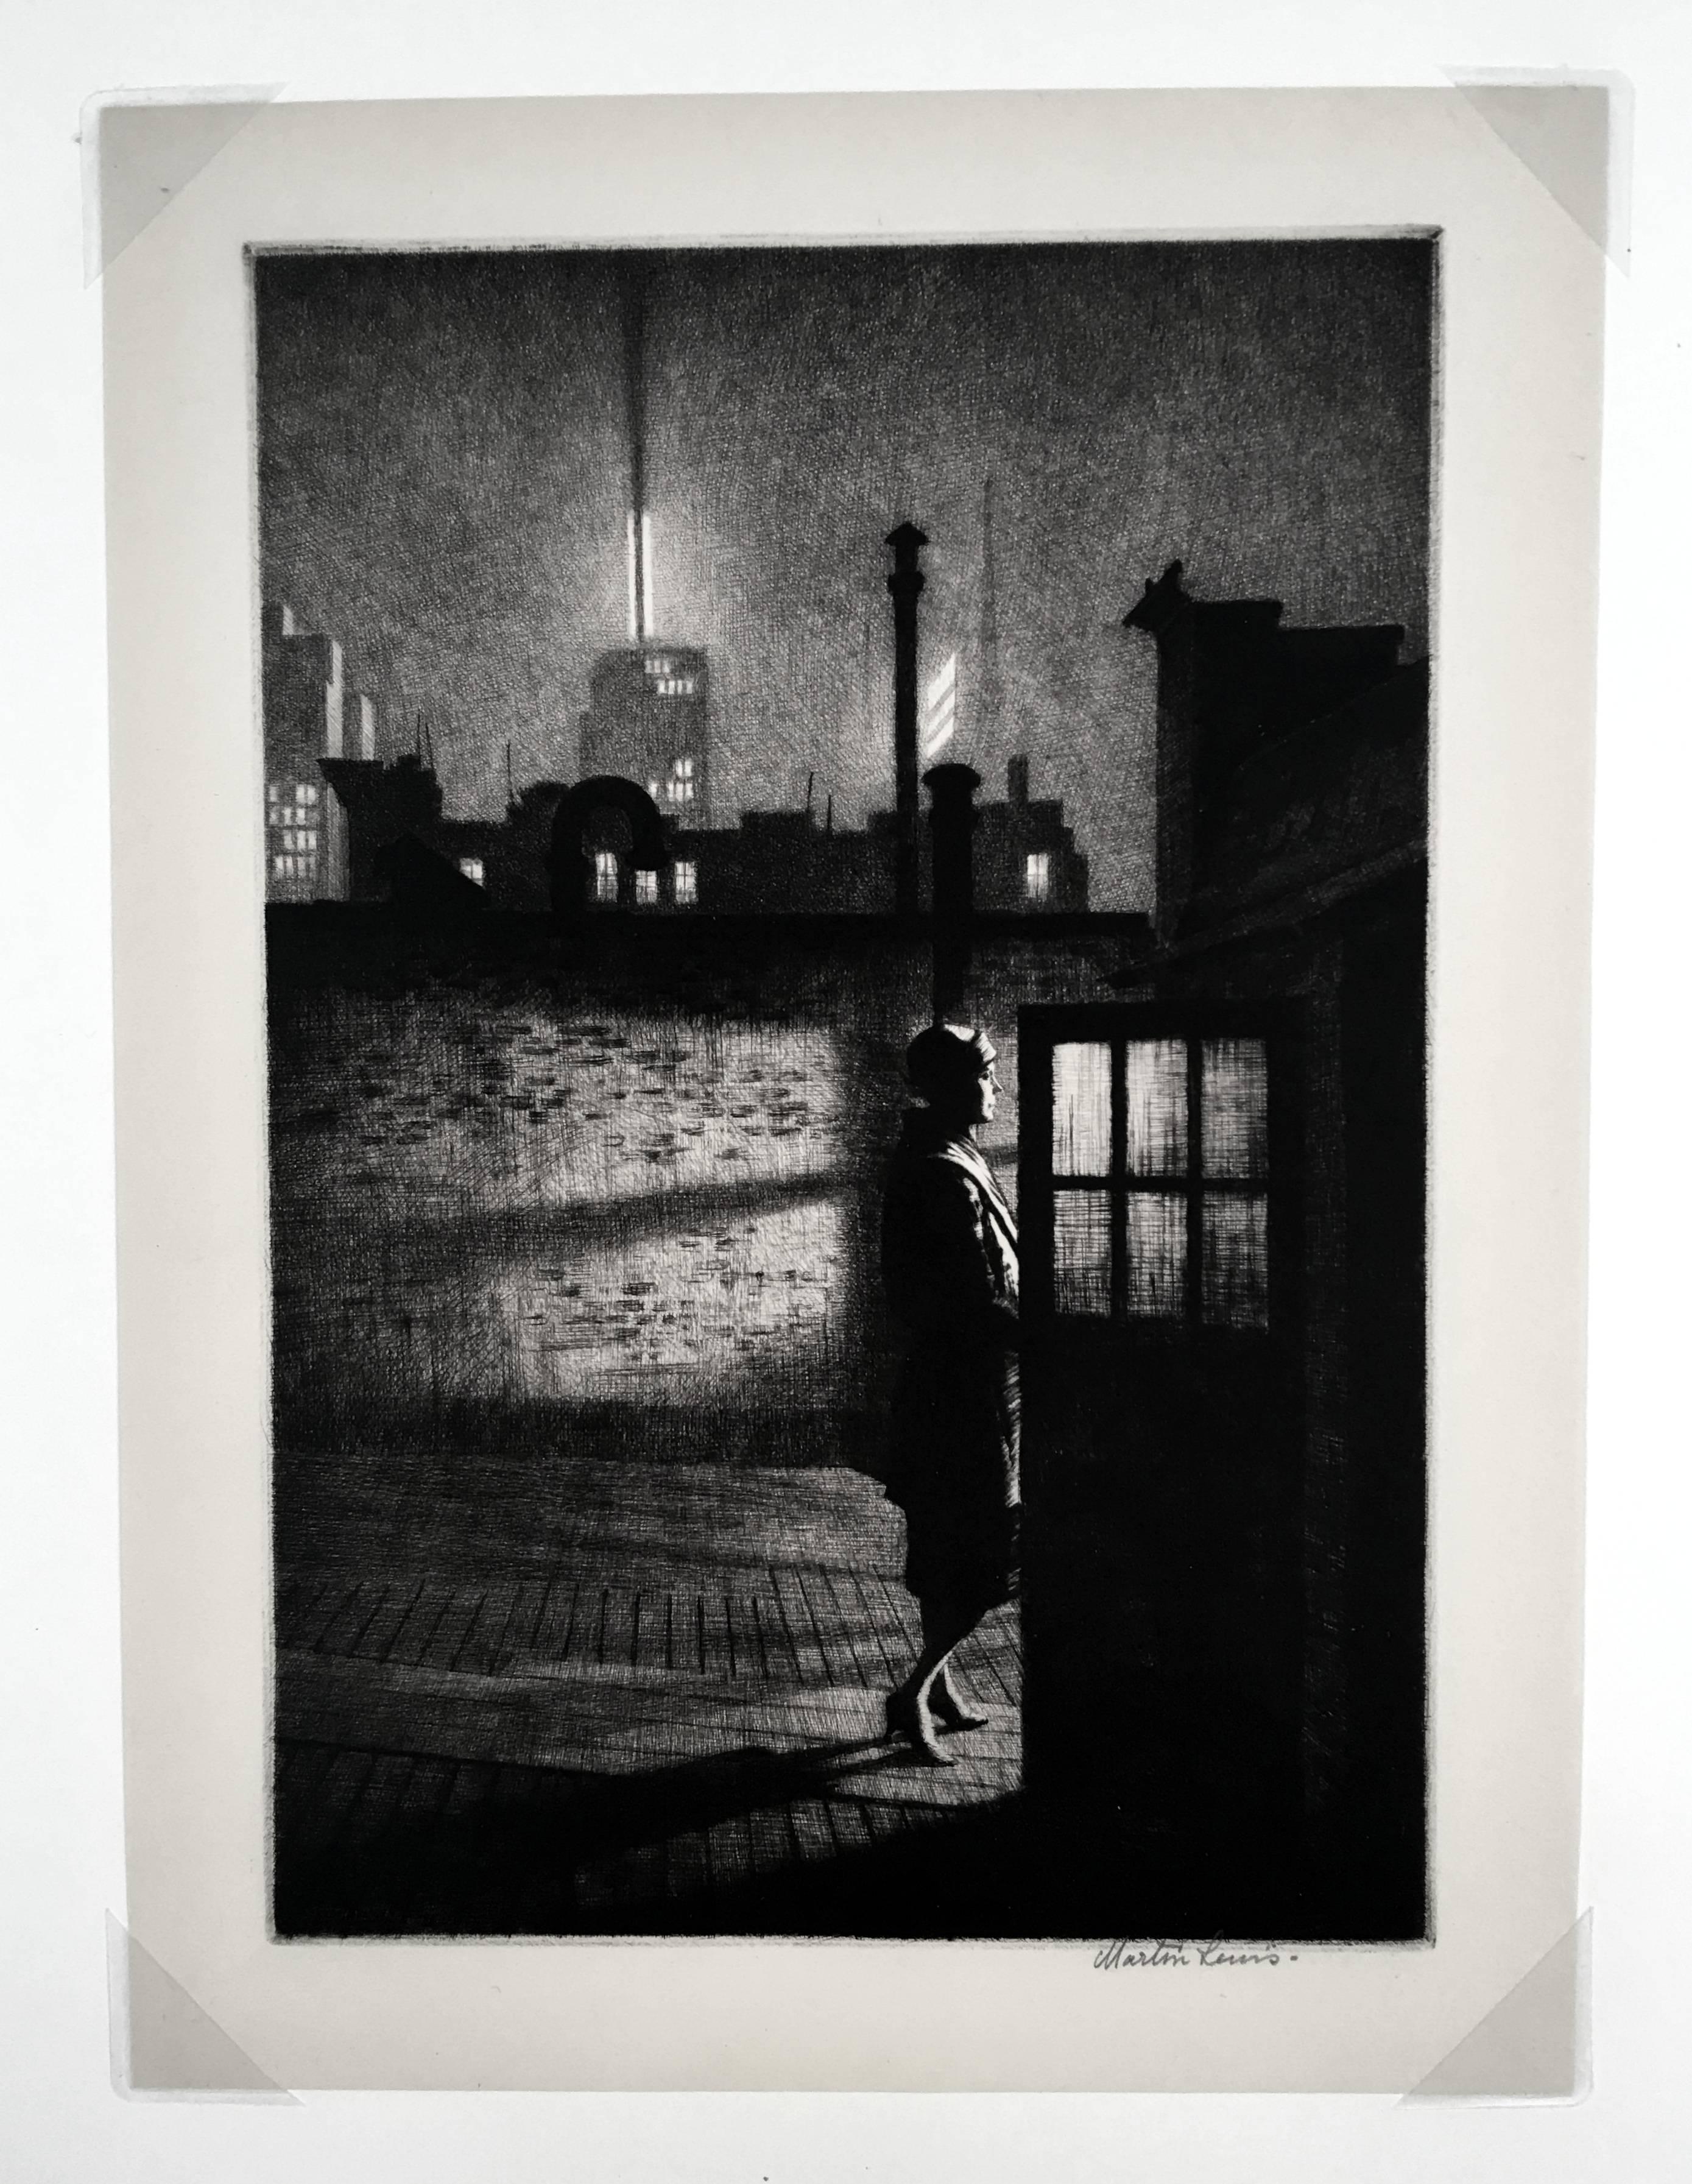 Little Penthouse - Print by Martin Lewis